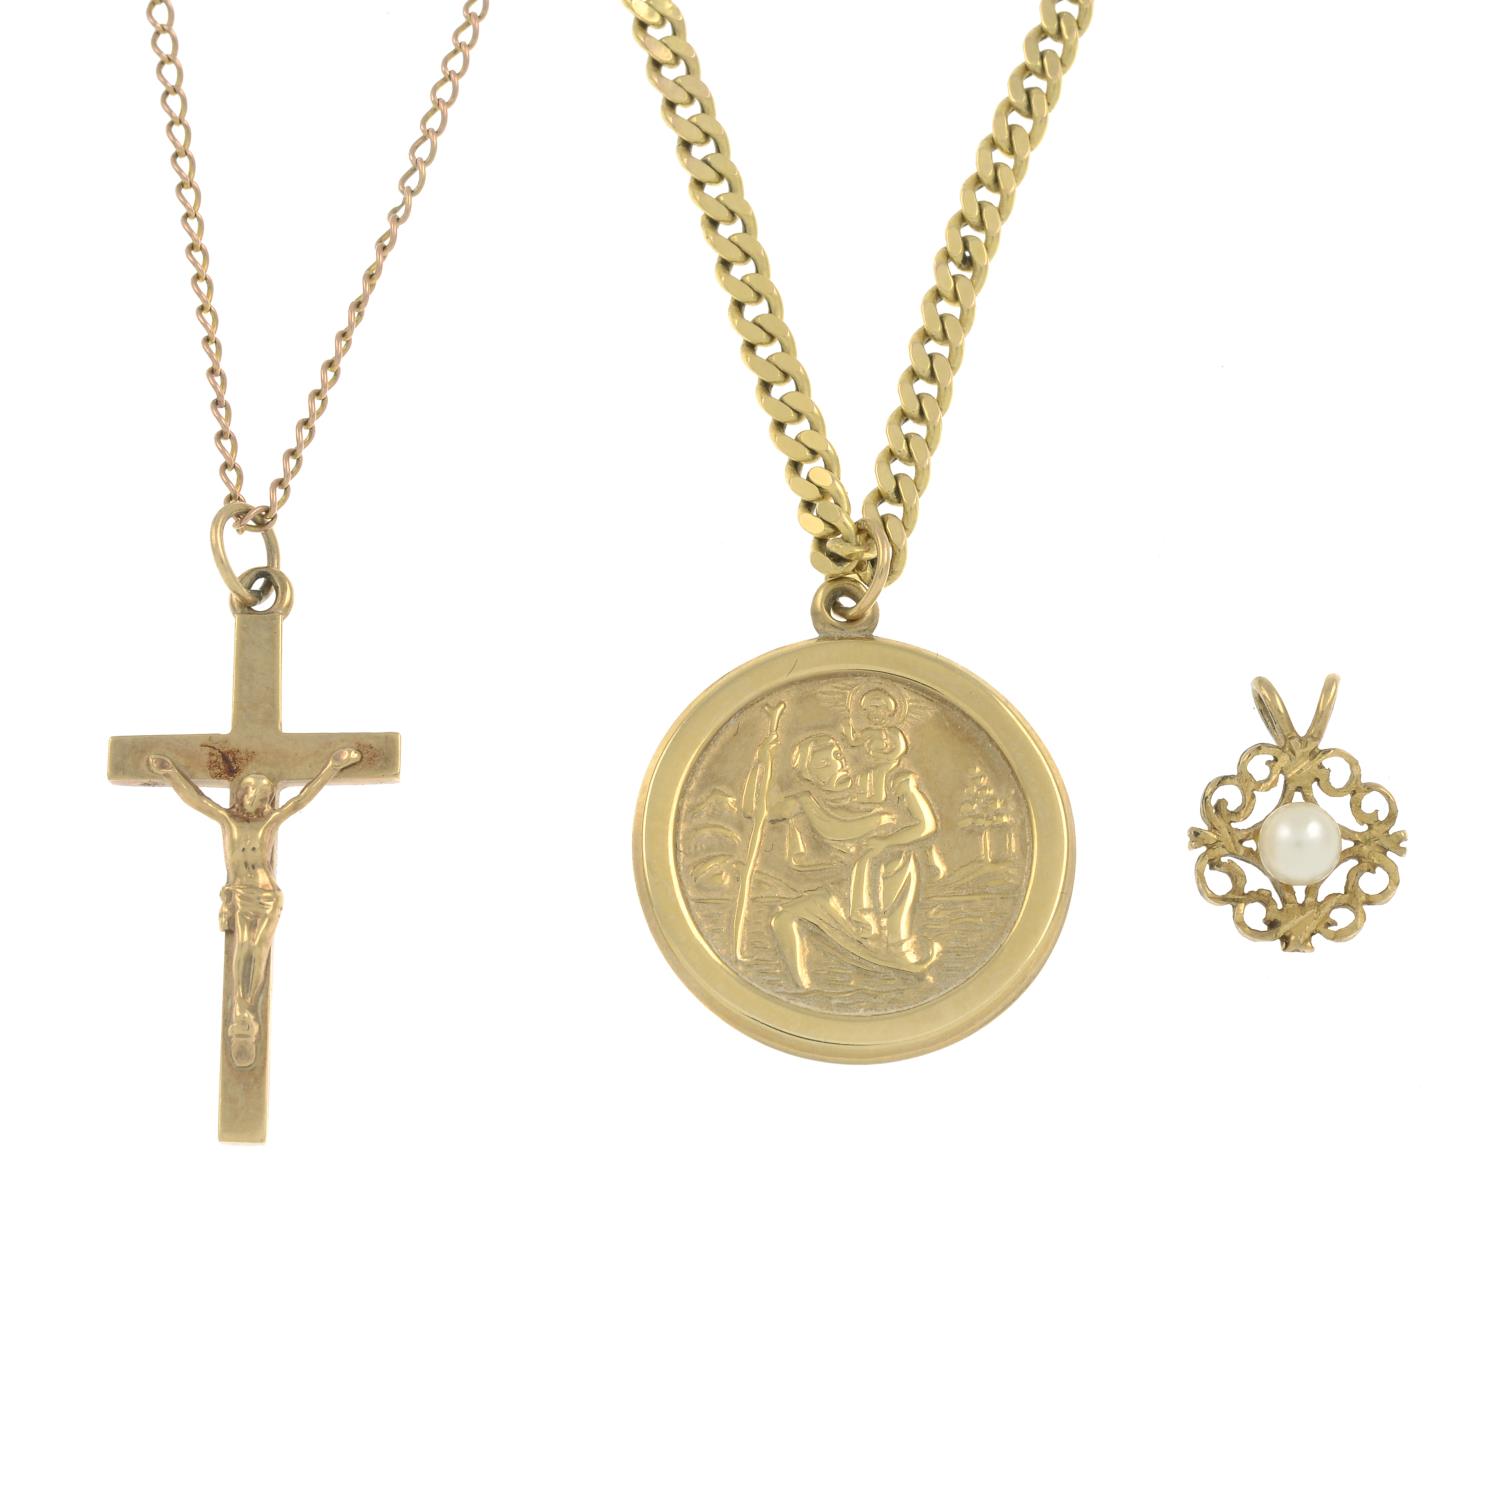 Six pendants and four chains.With marks and hallmarks for 9ct gold.